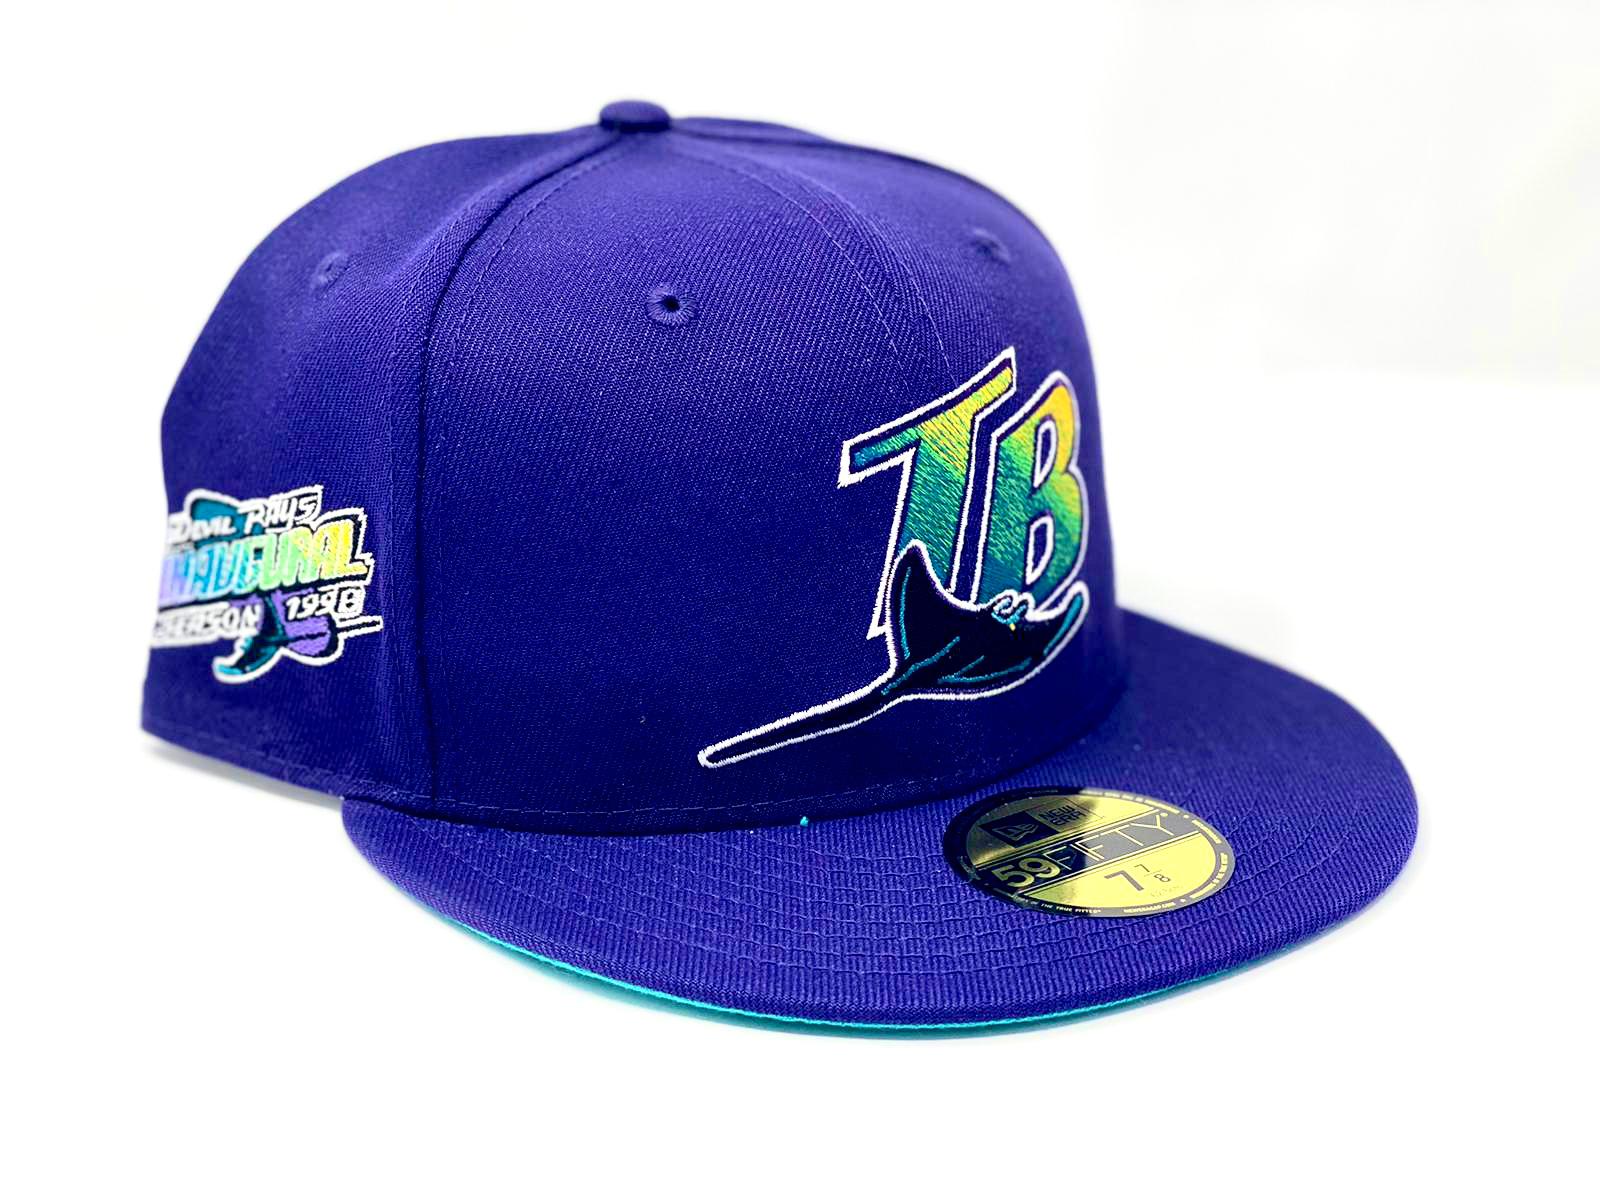 Purple Tampa Bay Rays Cooperstown Trucker Cap - TB Republic – The